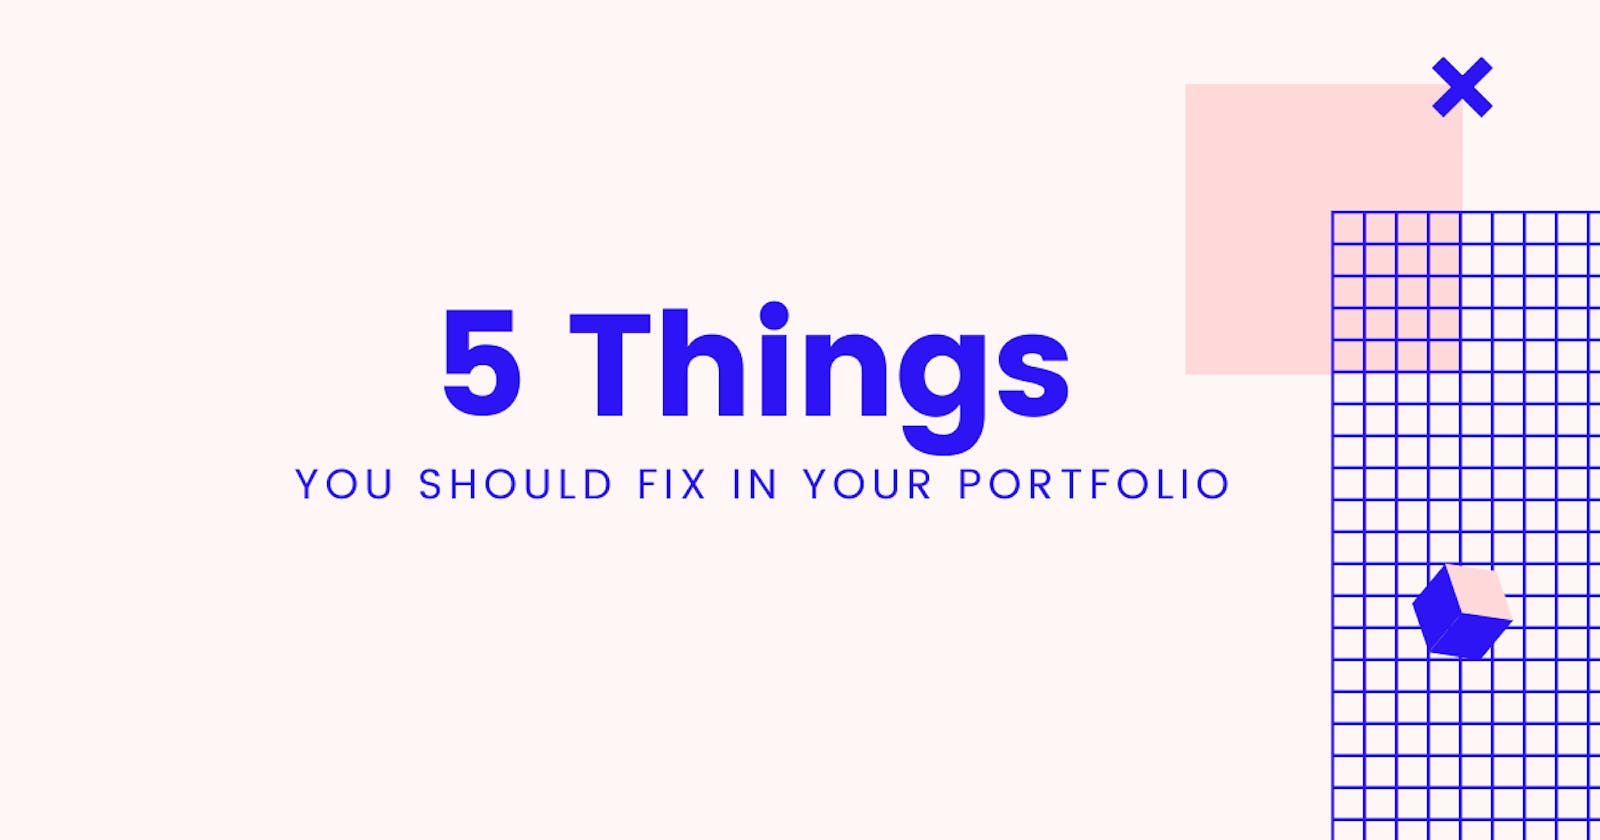 5 things you should fix in your portfolio